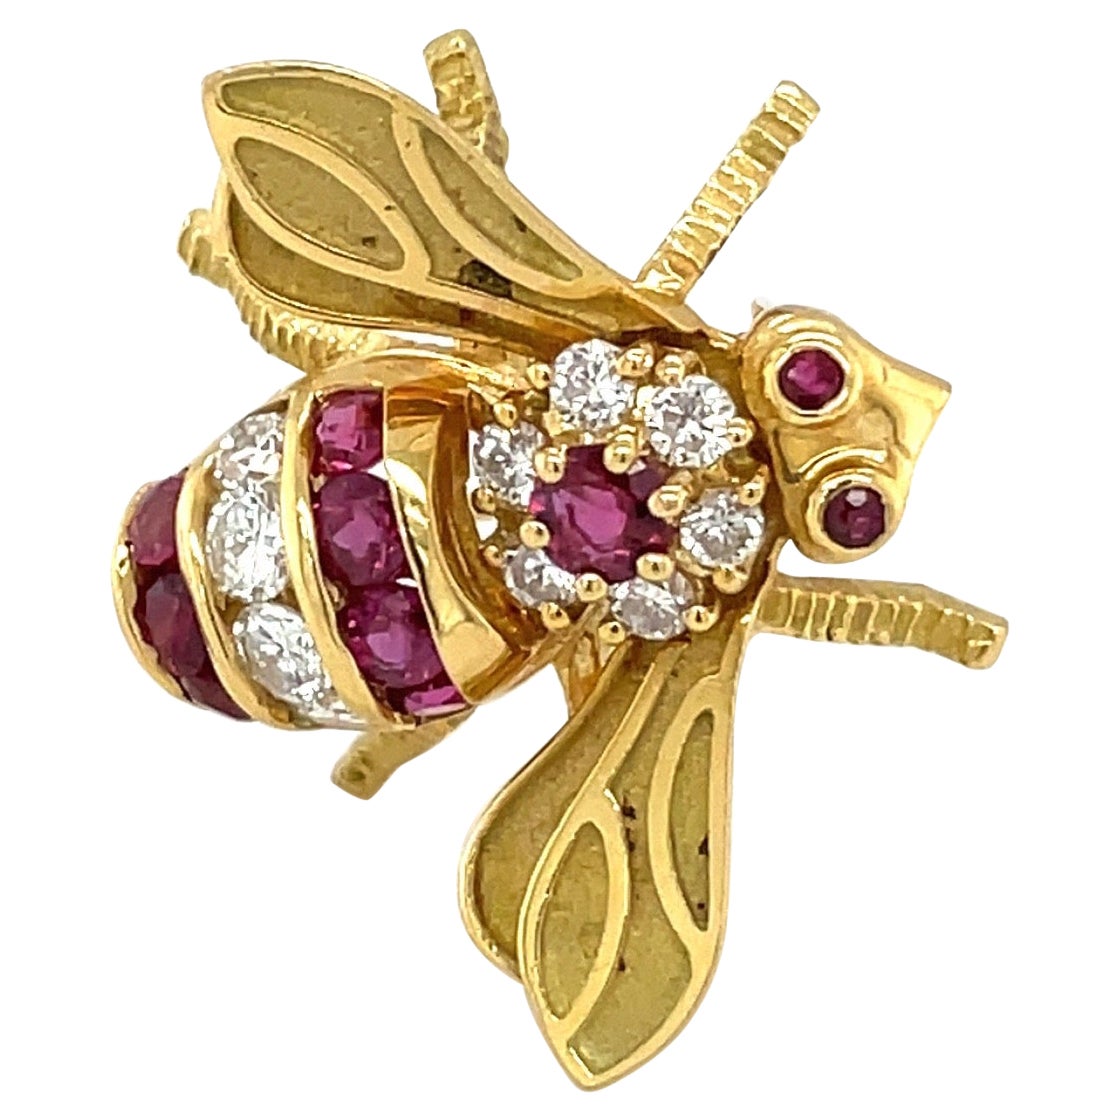 18KT Yellow Gold Bee Brooch with Ruby 0.80Ct. & Diamond 0.49Ct